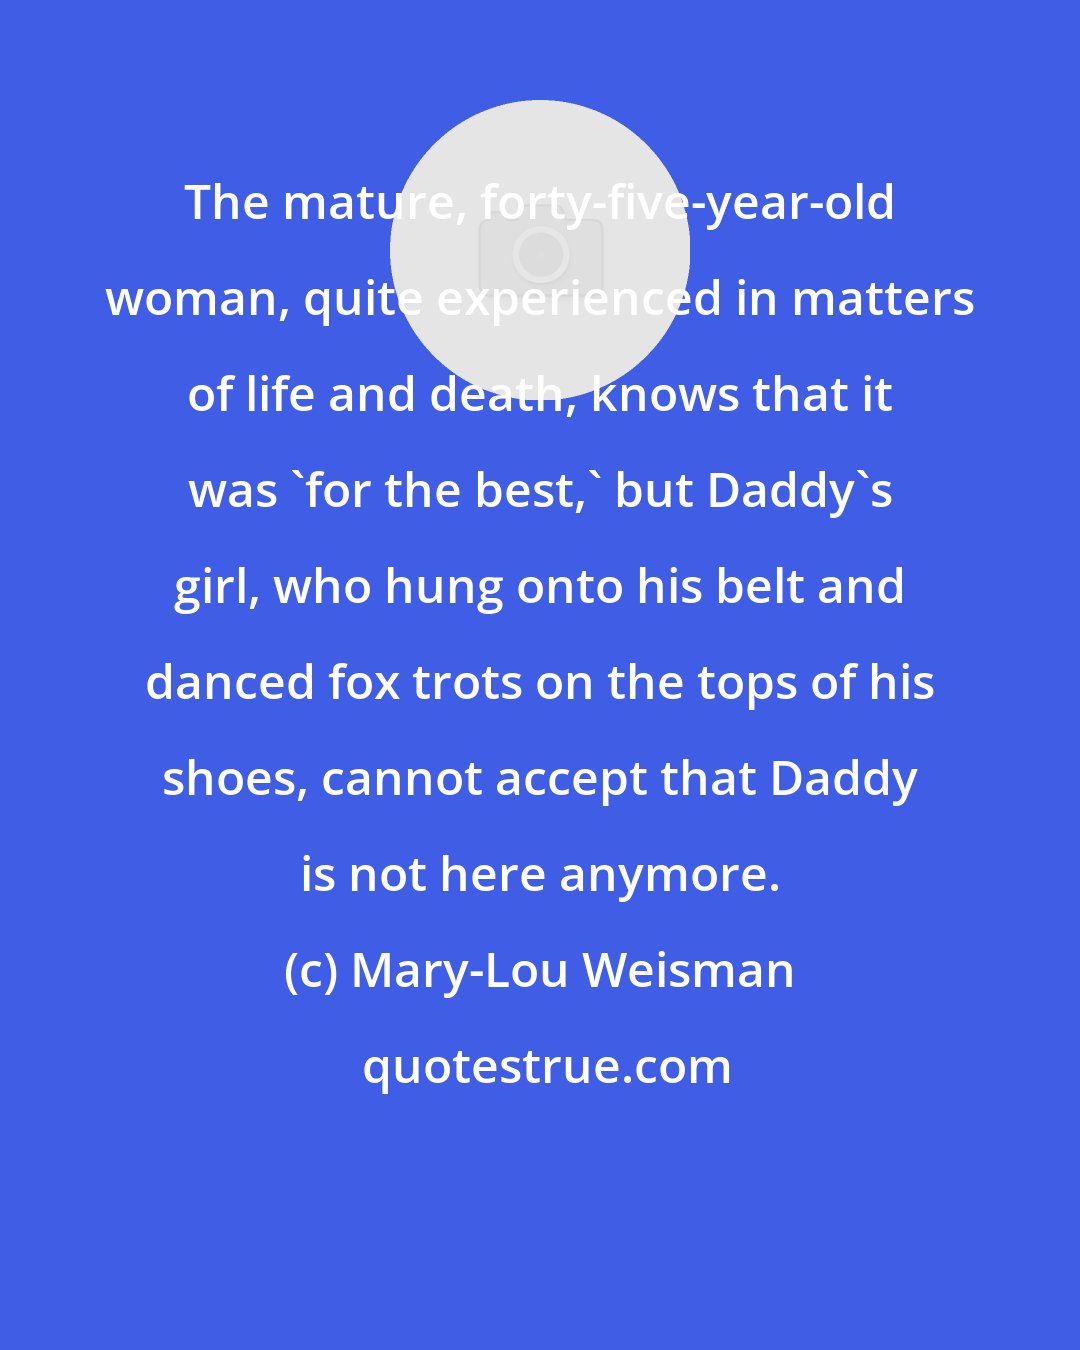 Mary-Lou Weisman: The mature, forty-five-year-old woman, quite experienced in matters of life and death, knows that it was 'for the best,' but Daddy's girl, who hung onto his belt and danced fox trots on the tops of his shoes, cannot accept that Daddy is not here anymore.